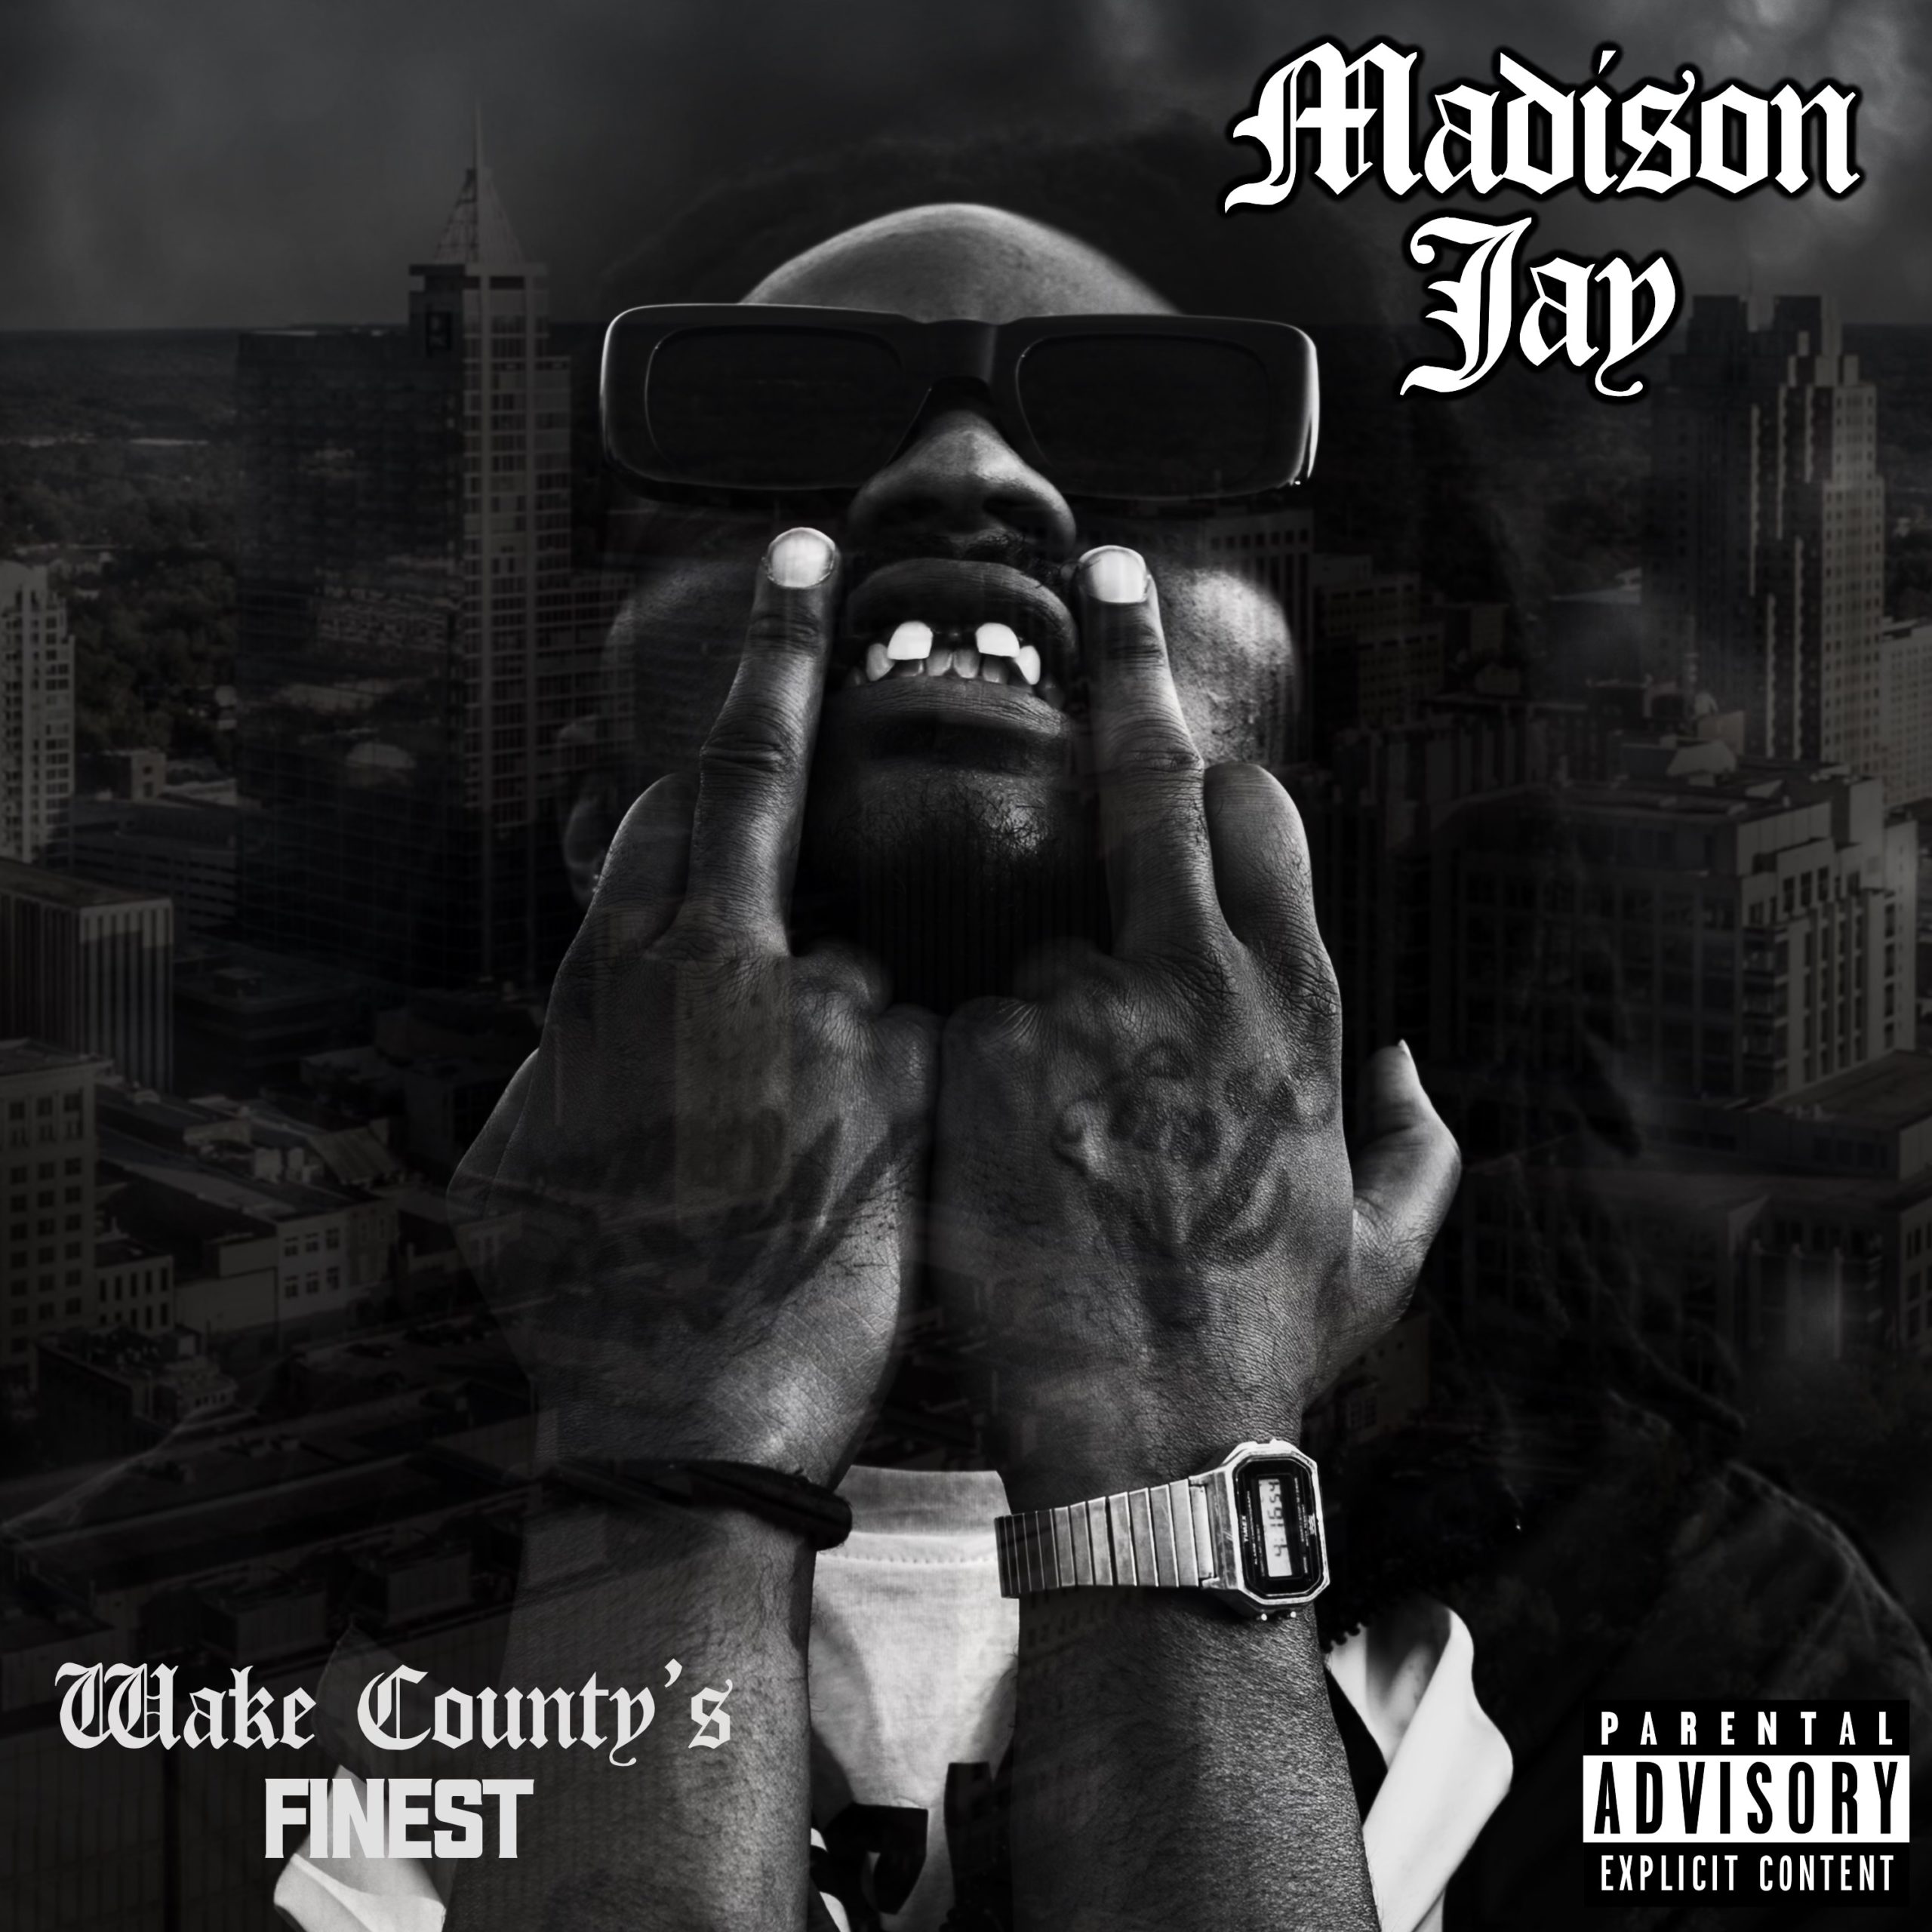 Madison Jay Comes Through With New Album “Wake County’s Finest” @themadisonjay